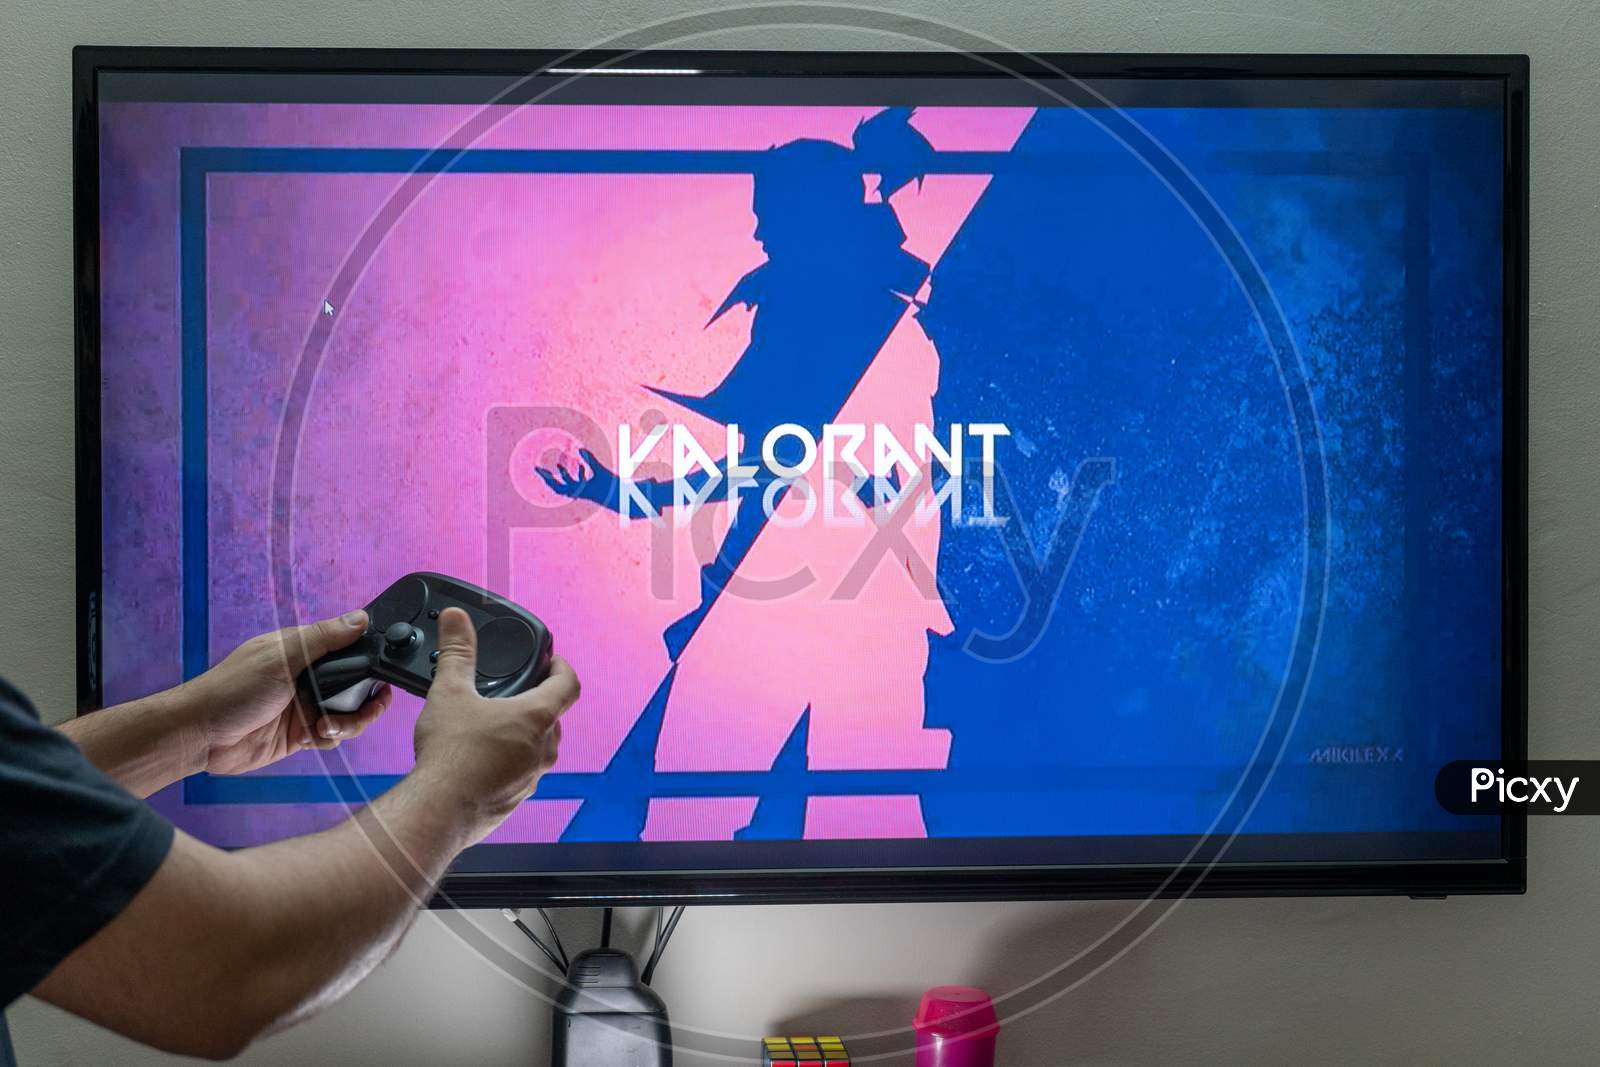 Man Holding Steam Controller In Front Of A Screen Loading Valorant On Pc Console For Gaming Showing This Popular Online Game